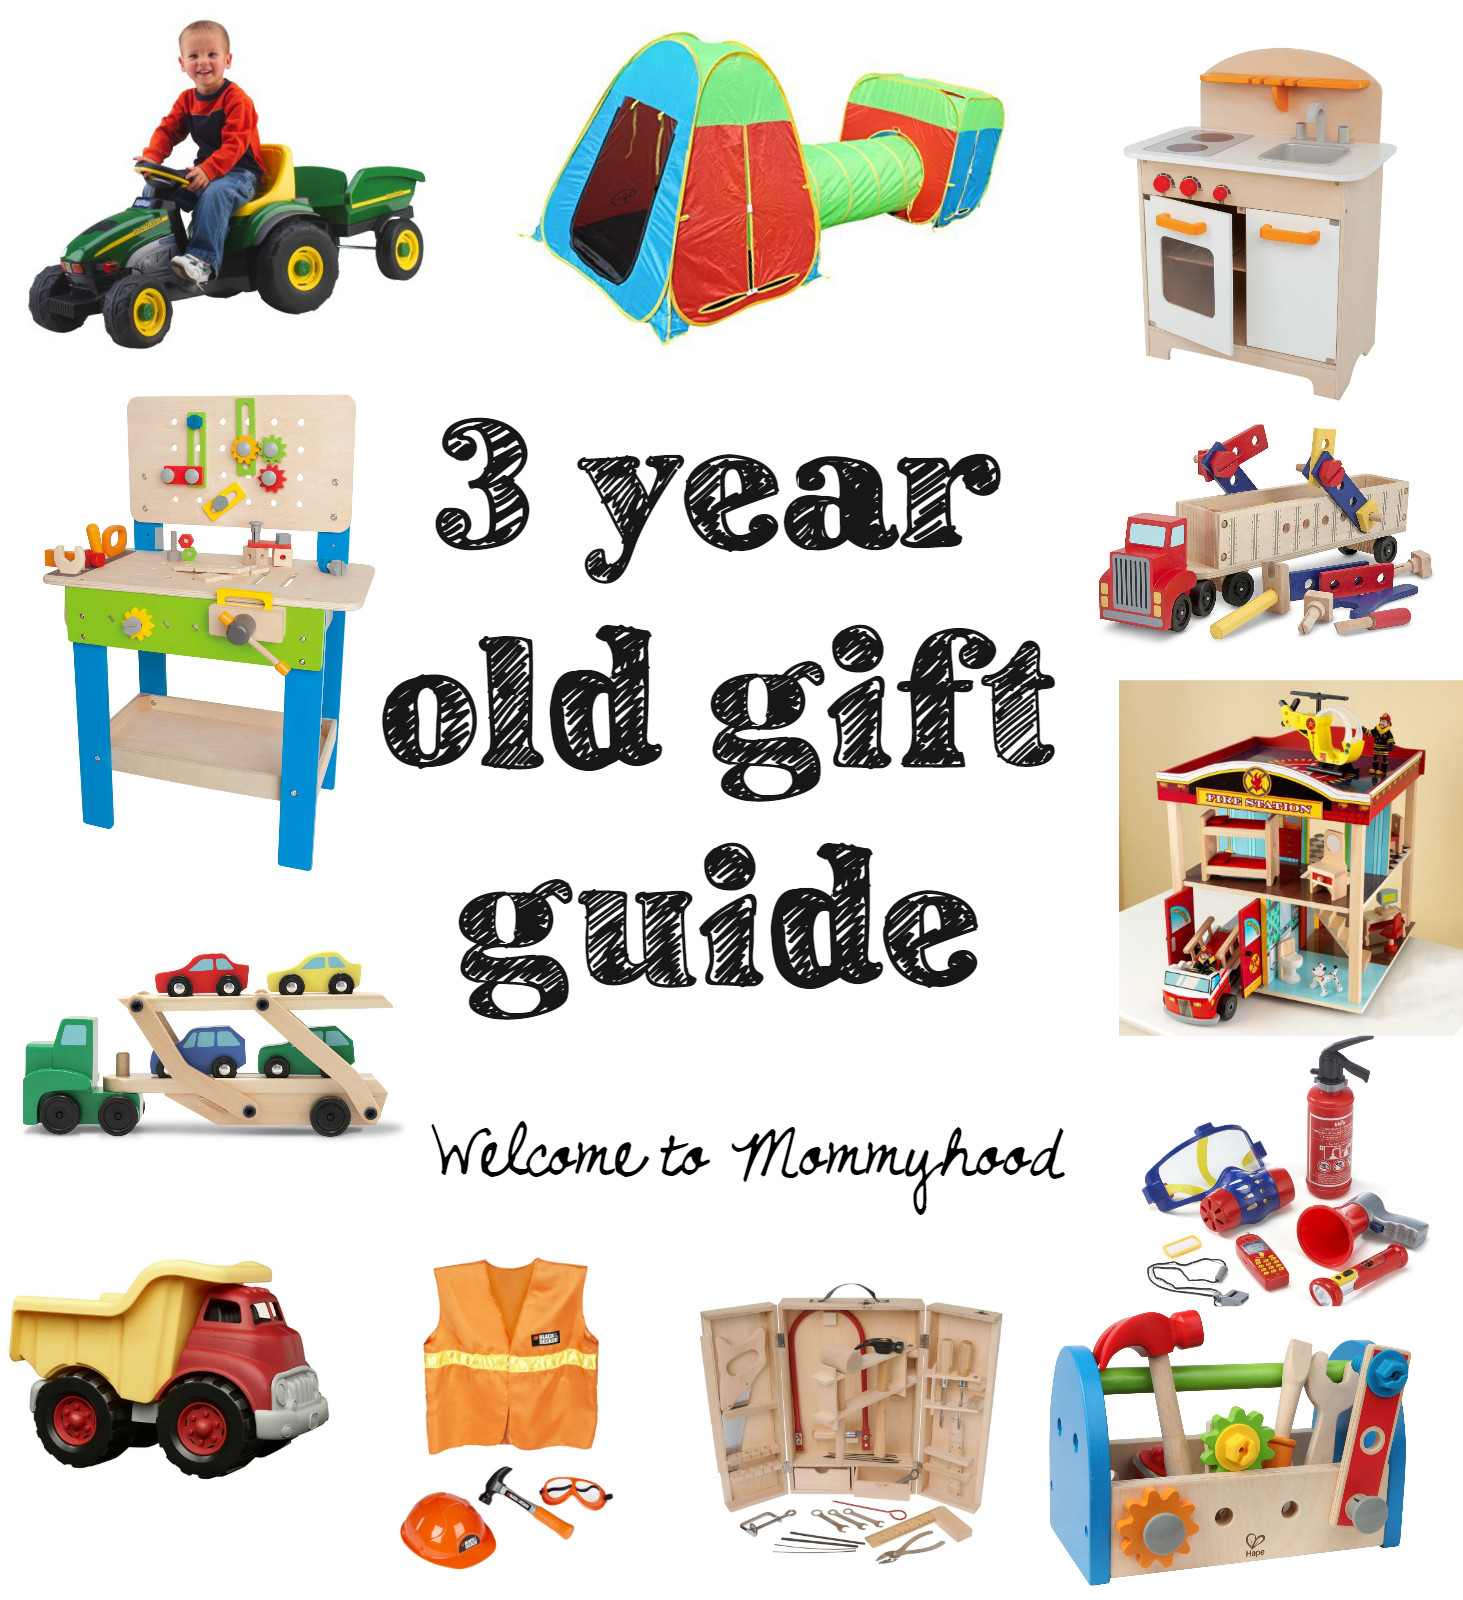 3 Year Old Birthday Gift Ideas Boy
 Gift guide for three year old boys from Wel e to